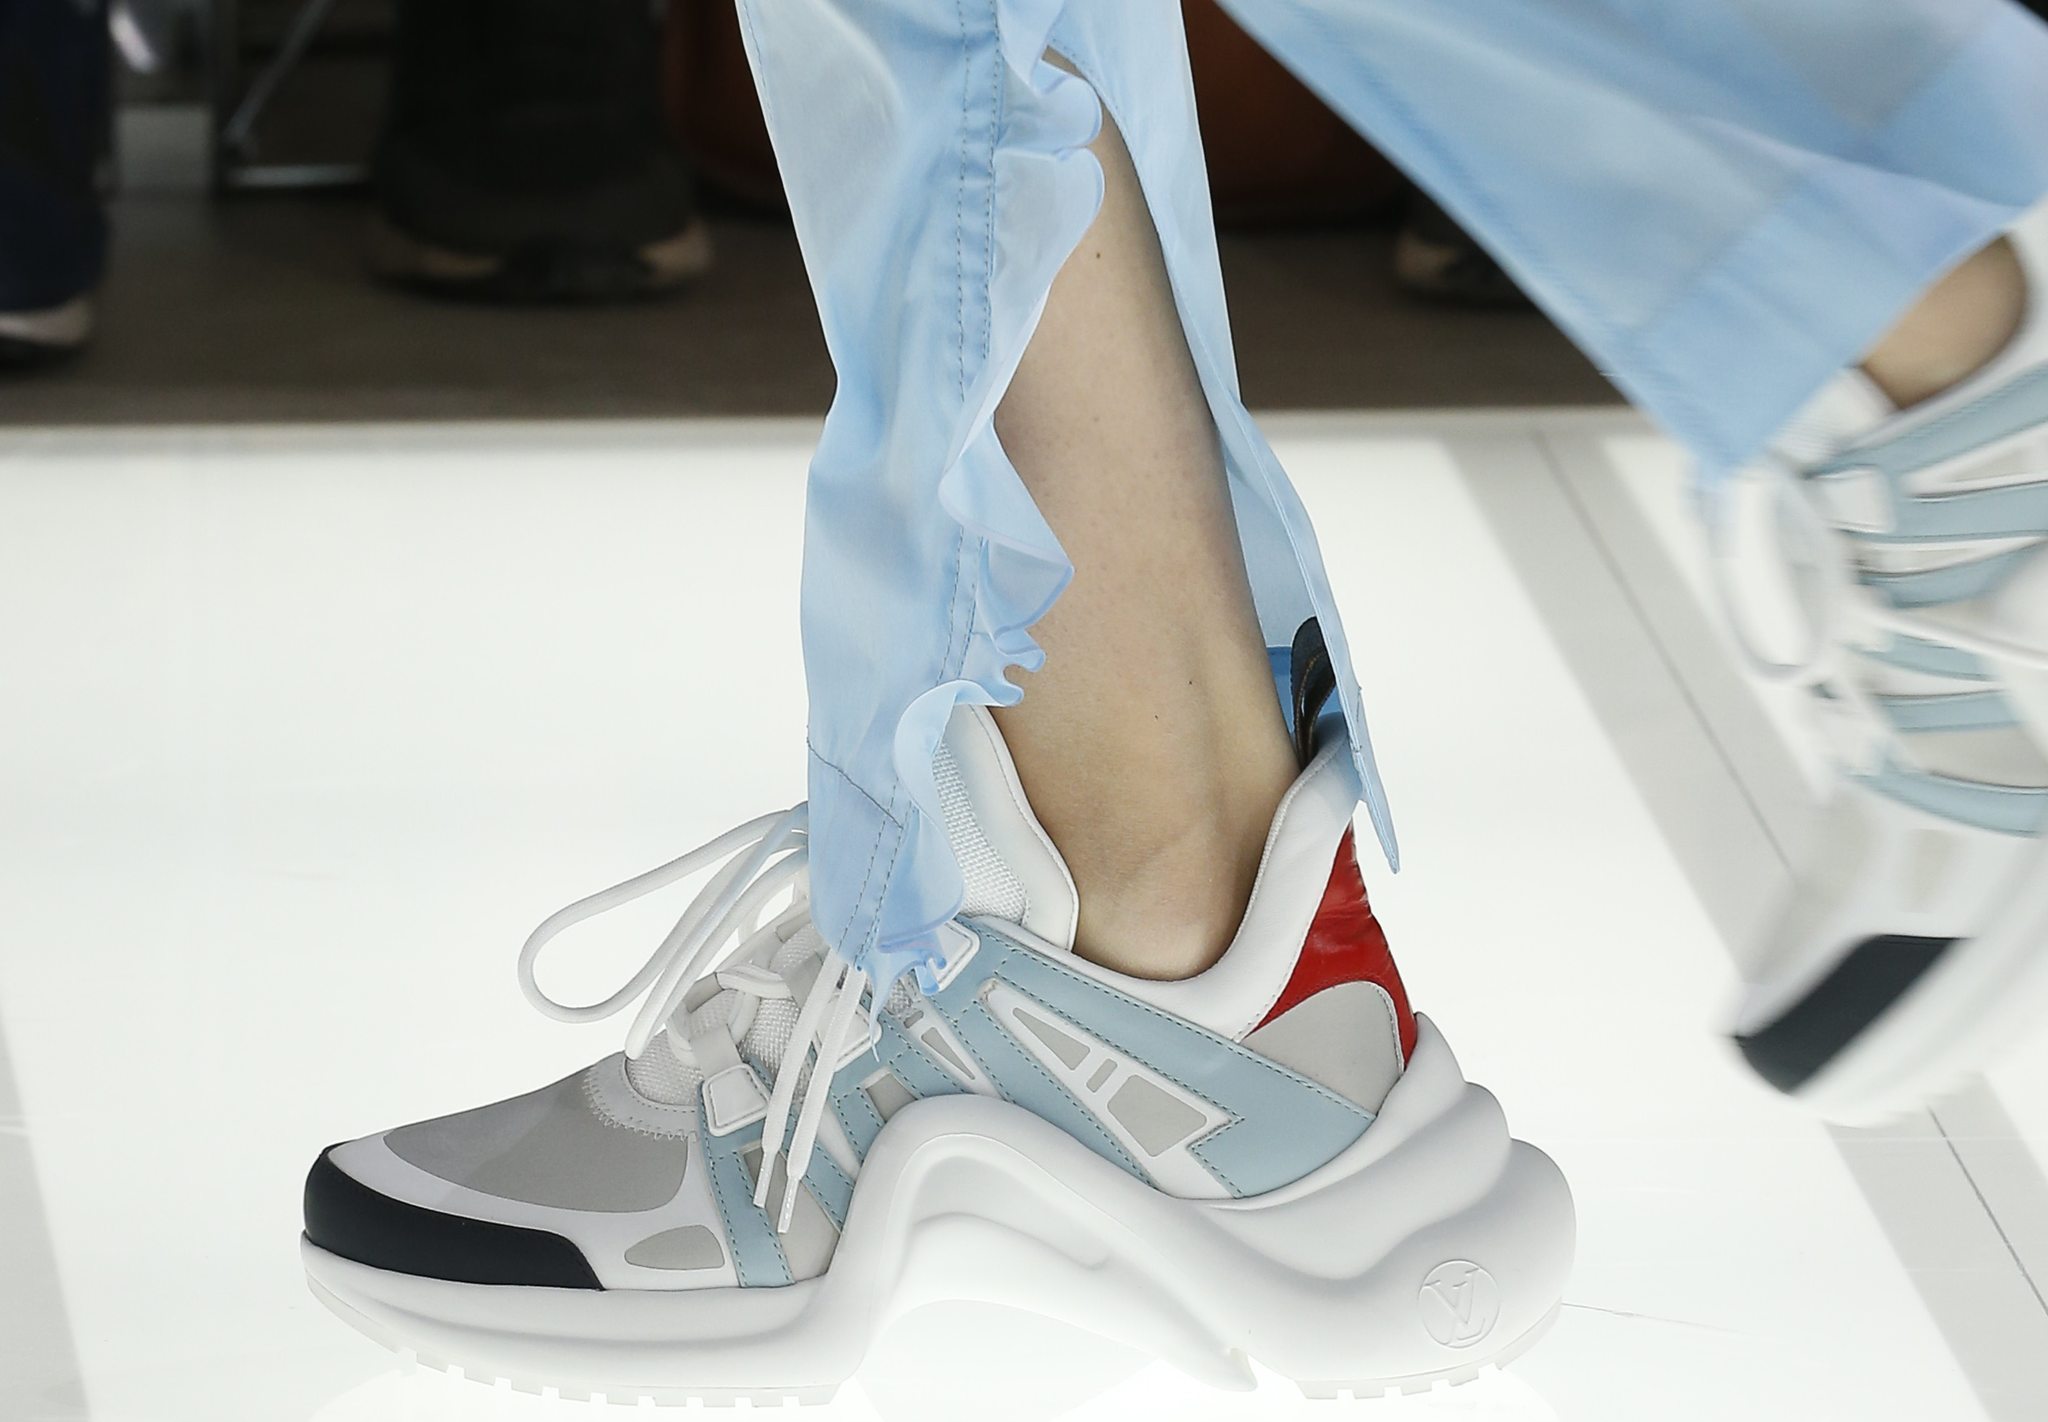 Louis Vuitton's extremely ugly sneakers